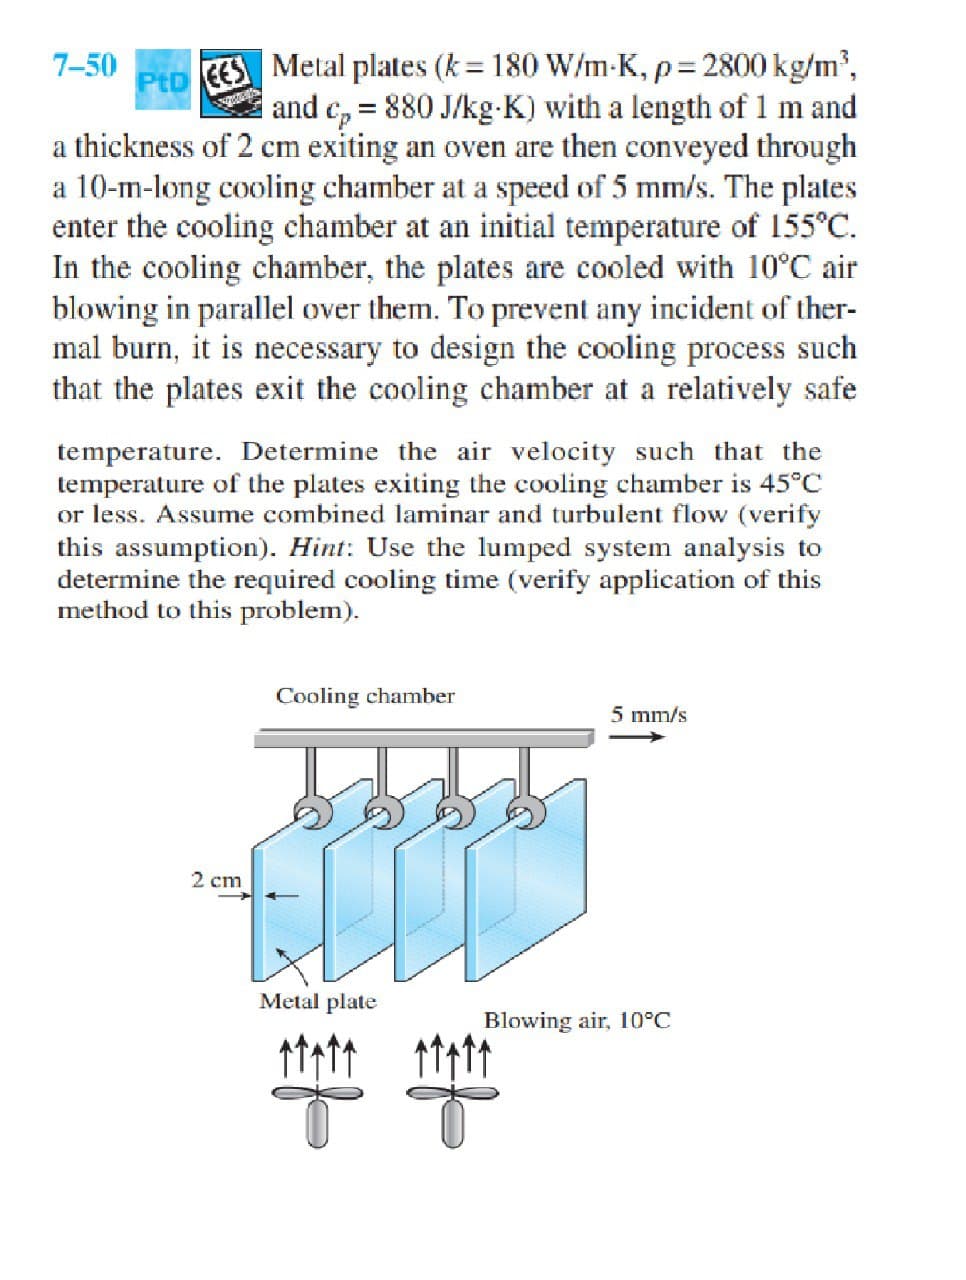 Metal plates (k = 180 W/m-K, p= 2800 kg/m',
and c, = 880 J/kg-K) with a length of 1 m and
a thickness of 2 cm exiting an oven are then conveyed through
a 10-m-long cooling chamber at a speed of 5 mm/s. The plates
enter the cooling chamber at an initial temperature of 155°C.
In the cooling chamber, the plates are cooled with 10°C air
blowing in parallel over them. To prevent any incident of ther-
mal burn, it is necessary to design the cooling process such
that the plates exit the cooling chamber at a relatively safe
7-50
%3D
PtD
EES
temperature. Determine the air velocity such that the
temperature of the plates exiting the cooling chamber is 45°C
or less. Assume combined laminar and turbulent flow (verify
this assumption). Hint: Use the lumped system analysis to
determine the required cooling time (verify application of this
method to this problem).
Cooling chamber
5 mm/s
2 cm
Metal plate
Blowing air, 10°C
of
